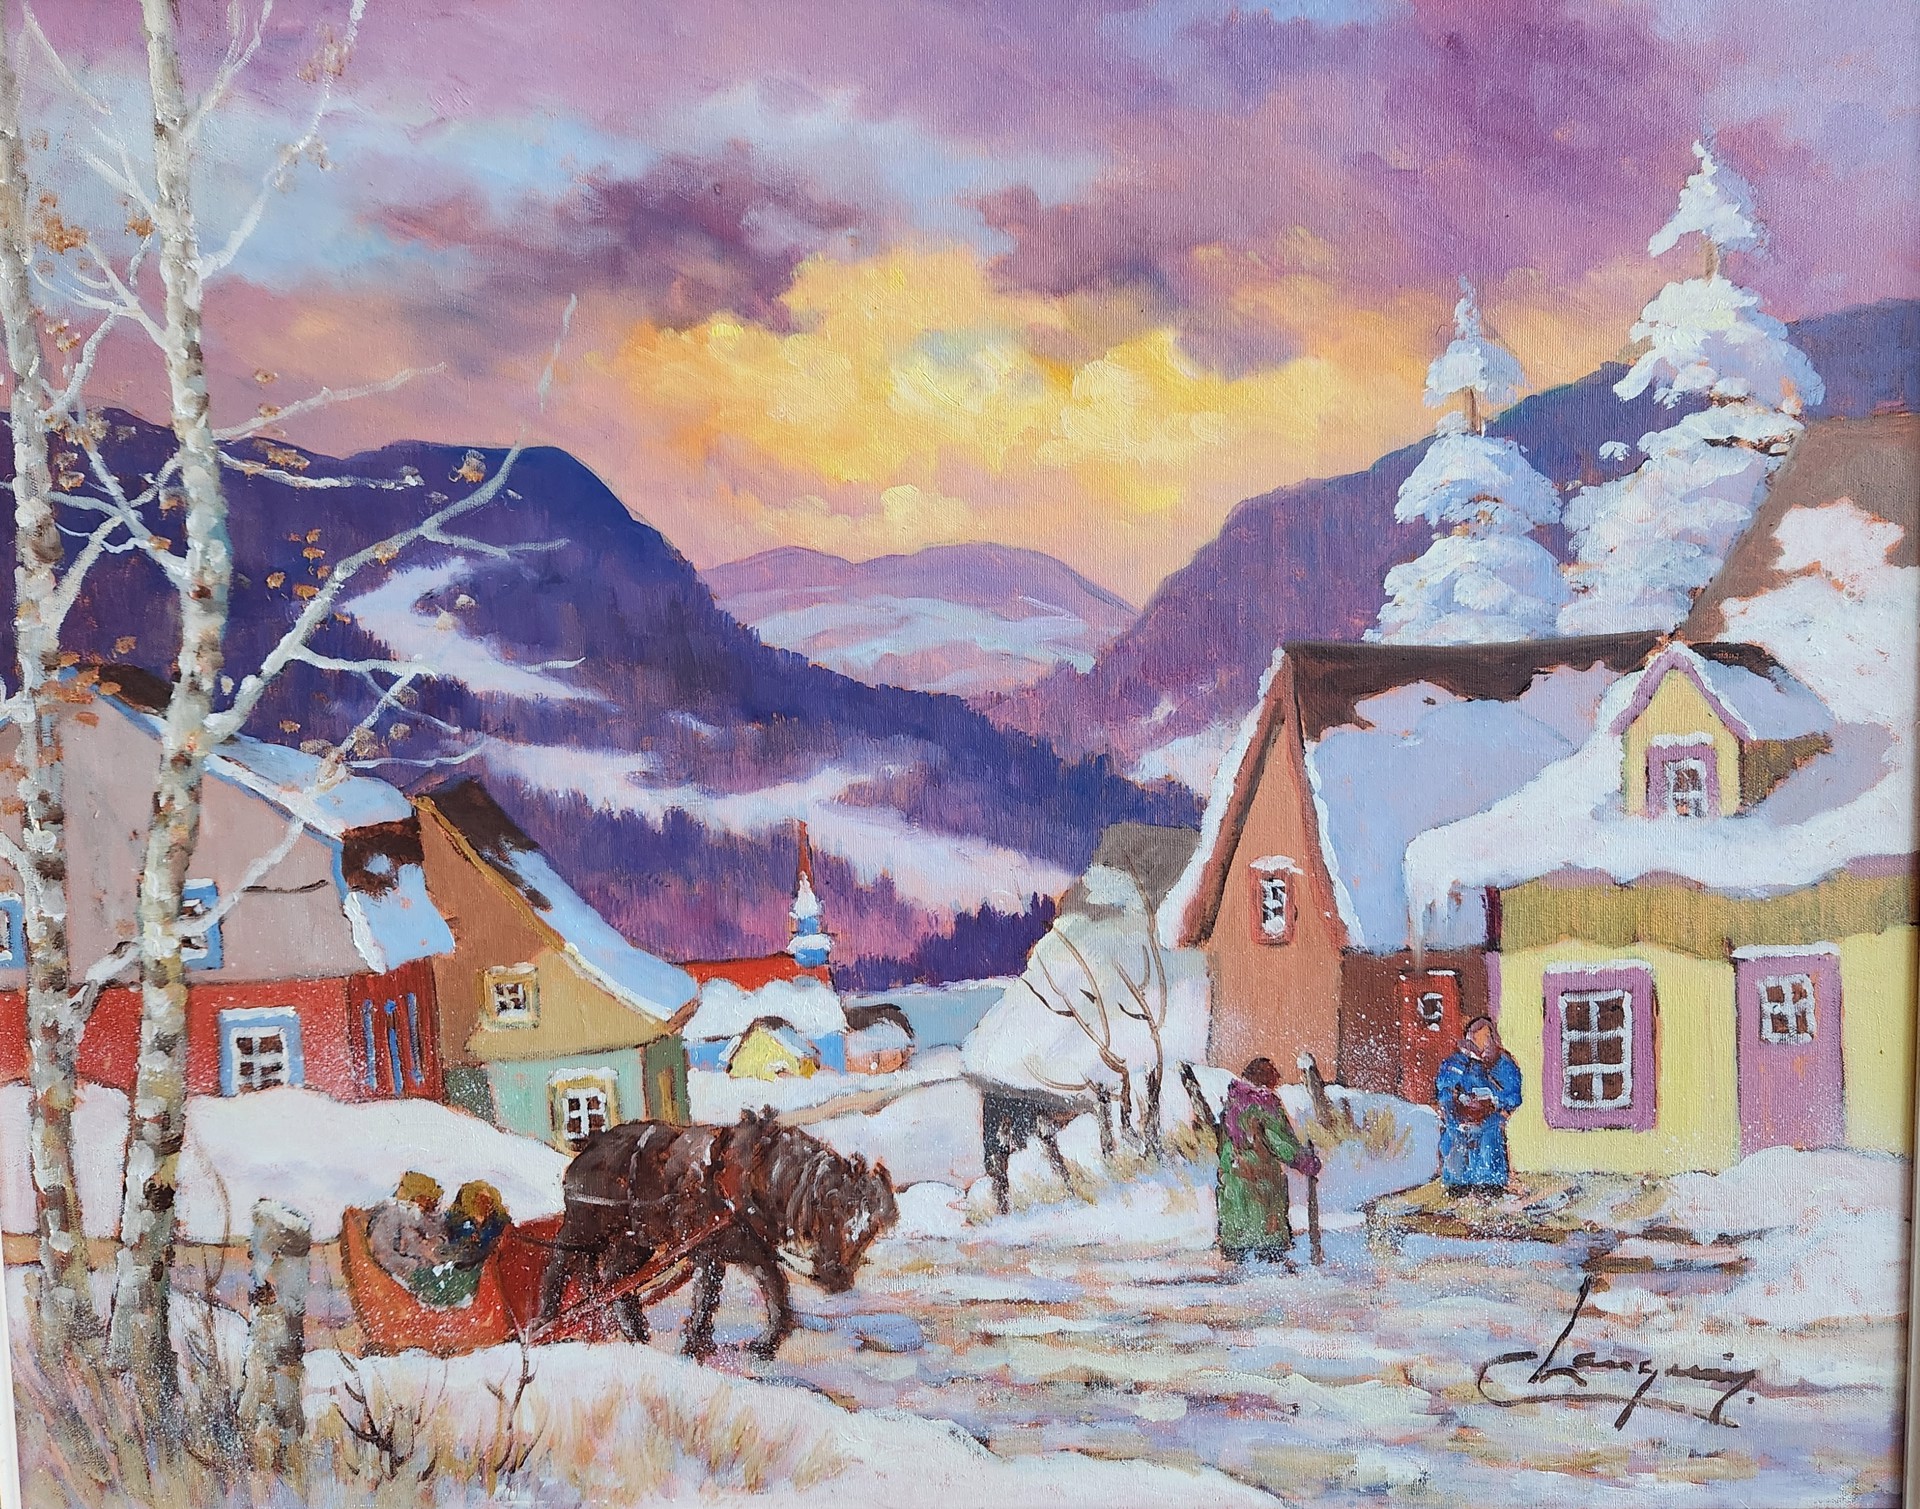 Return from the Market by Claude Langevin